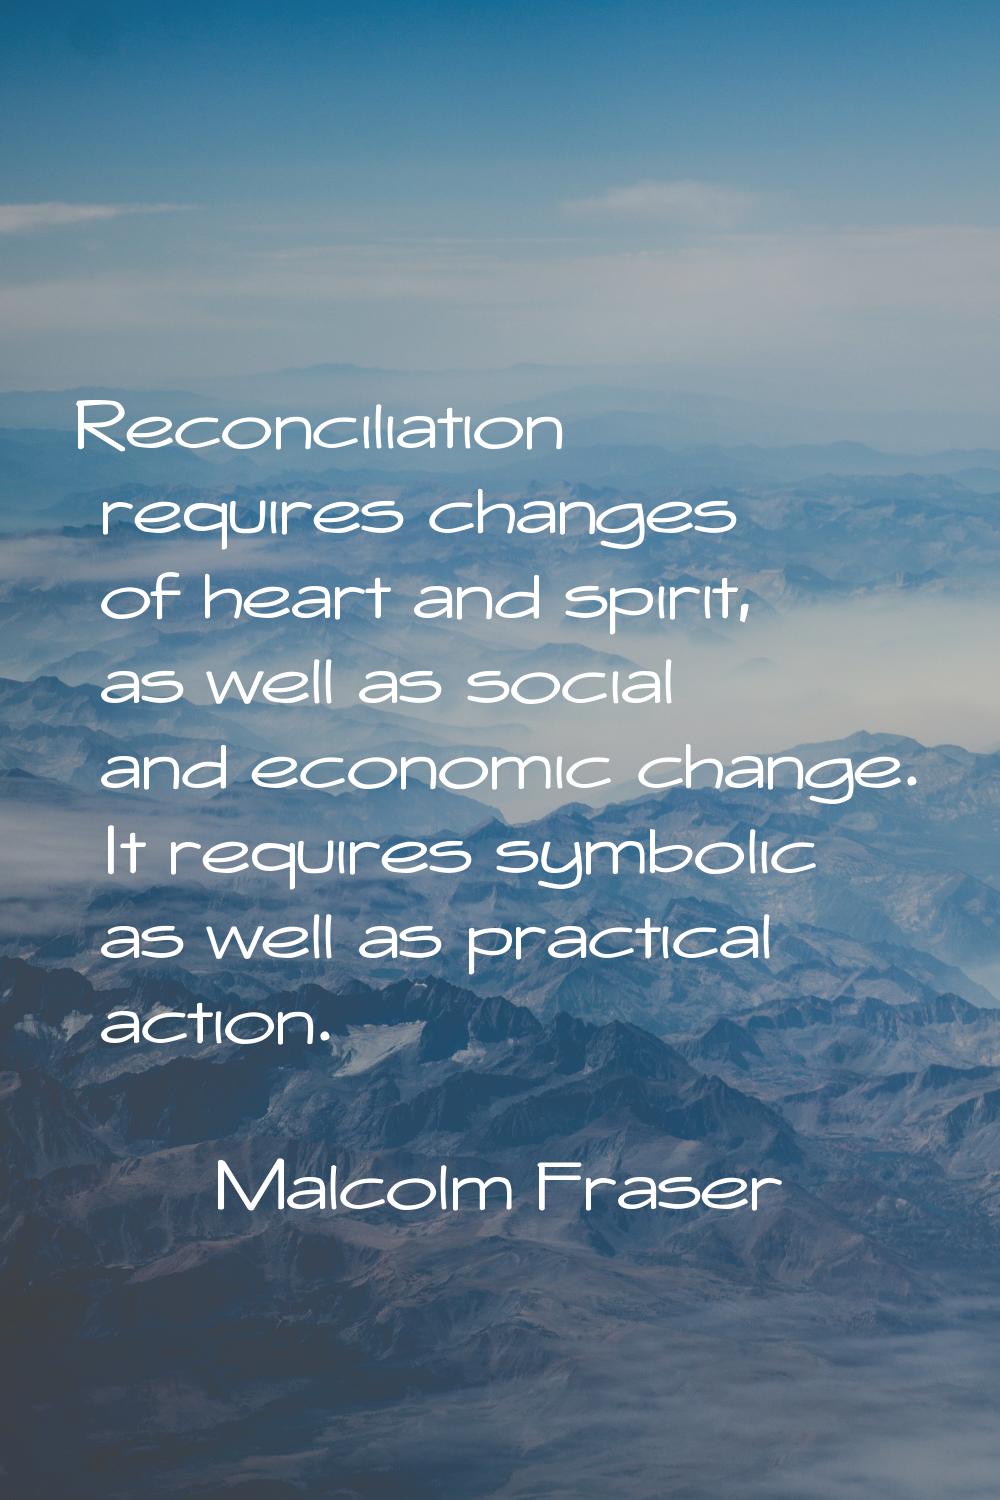 Reconciliation requires changes of heart and spirit, as well as social and economic change. It requ